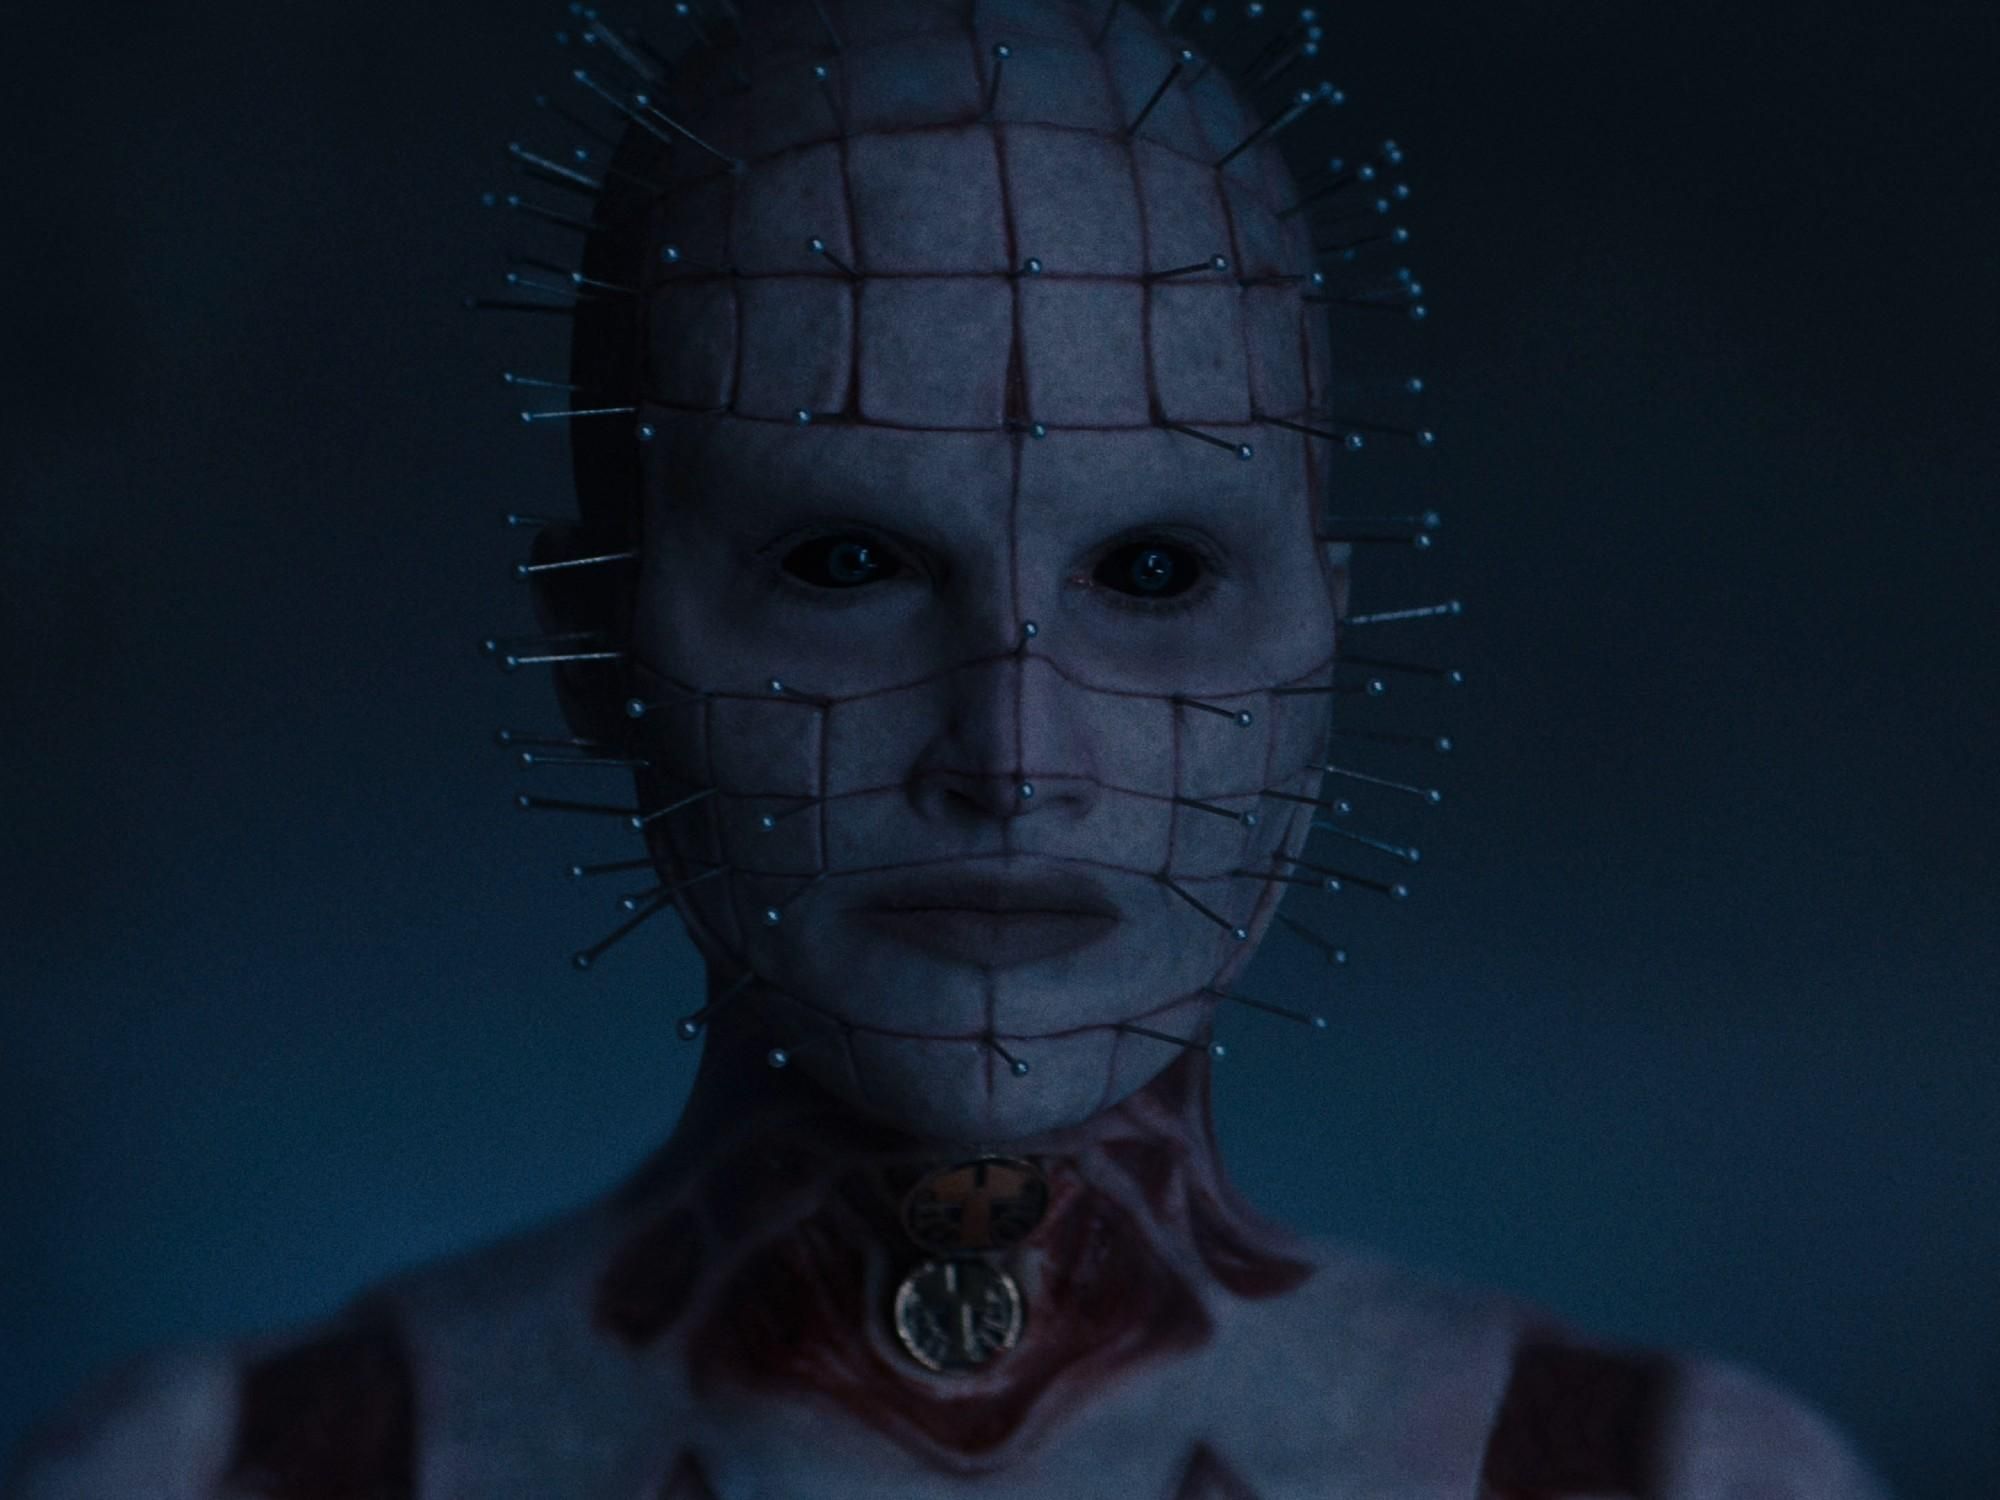 Hellraiser is stylishly gut-wrenching, but lacks substance overall